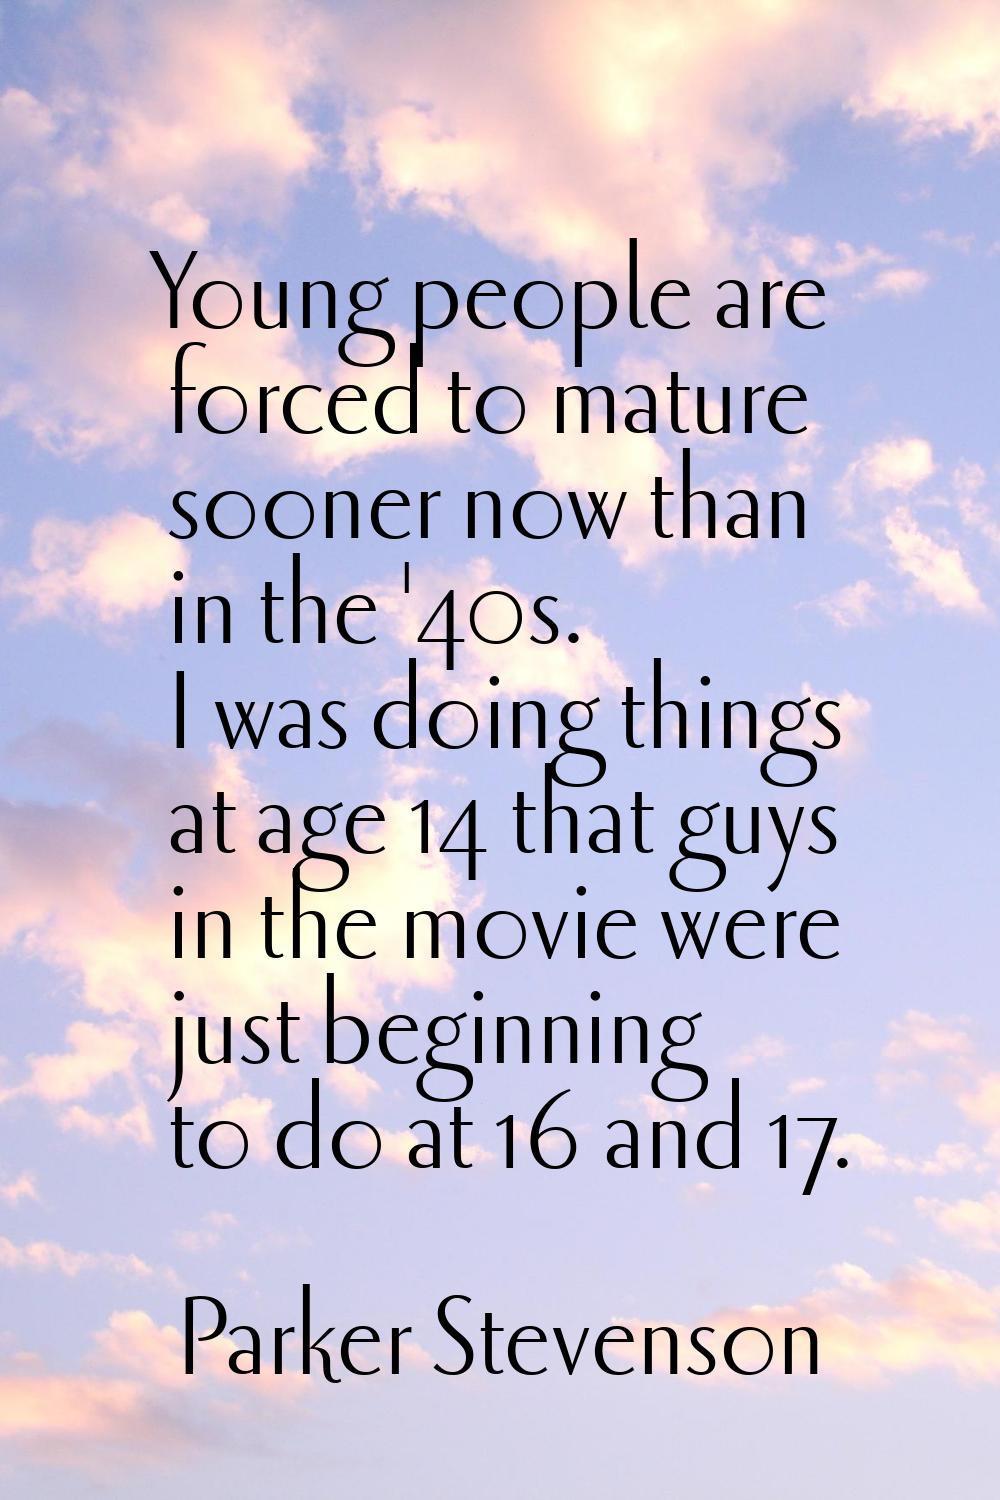 Young people are forced to mature sooner now than in the '40s. I was doing things at age 14 that gu